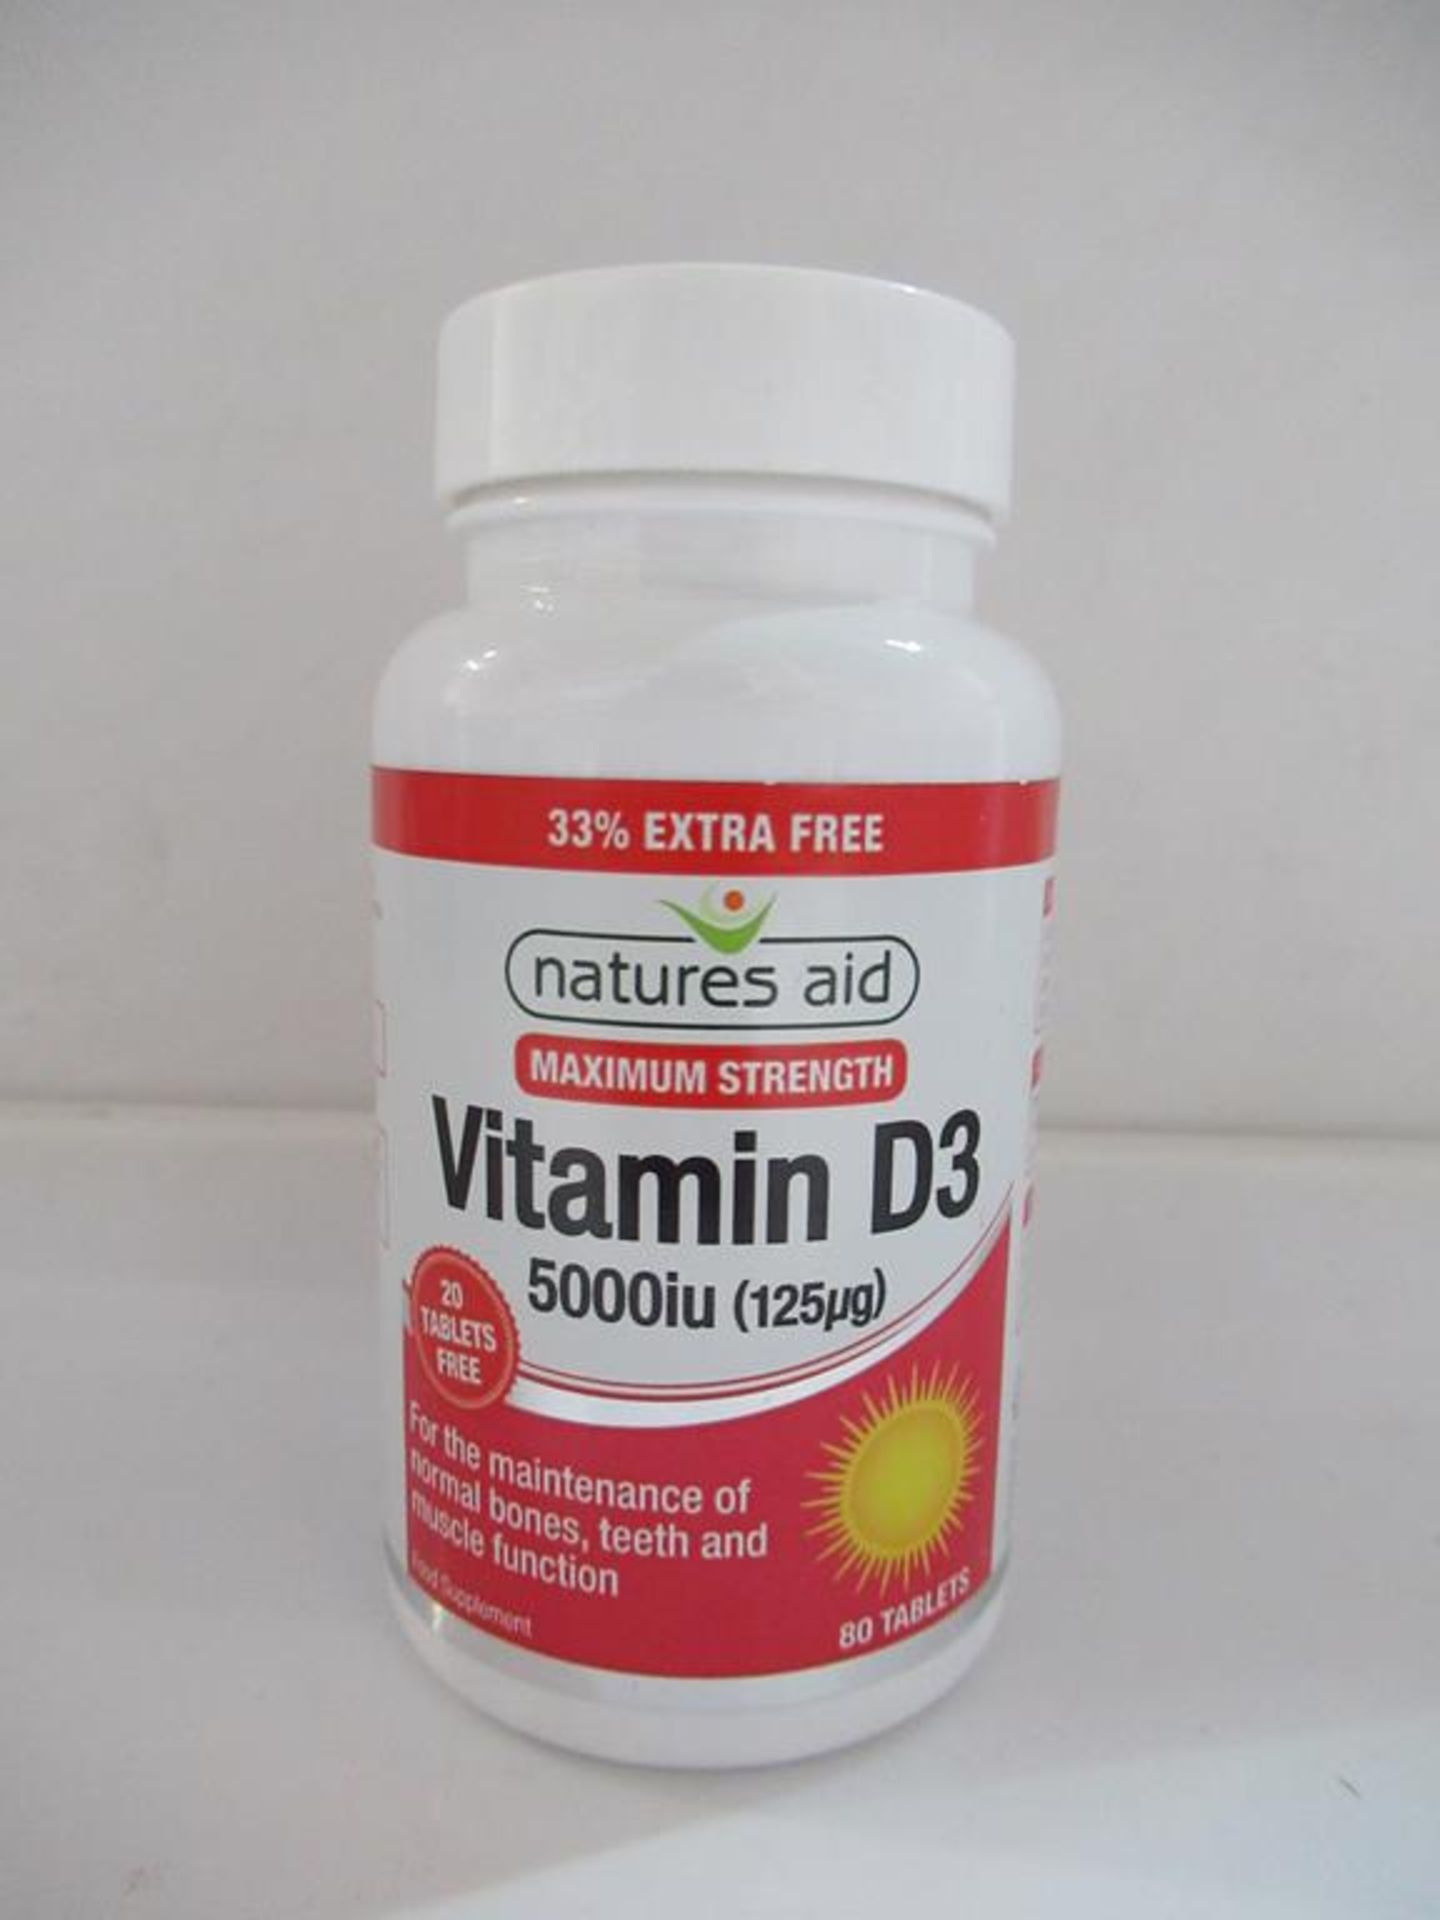 19 Natures Aid supplements to include: Vitamin D3, Evening Primrose Oil, 5-HTP Complex, Flaxseed Oil - Image 6 of 8